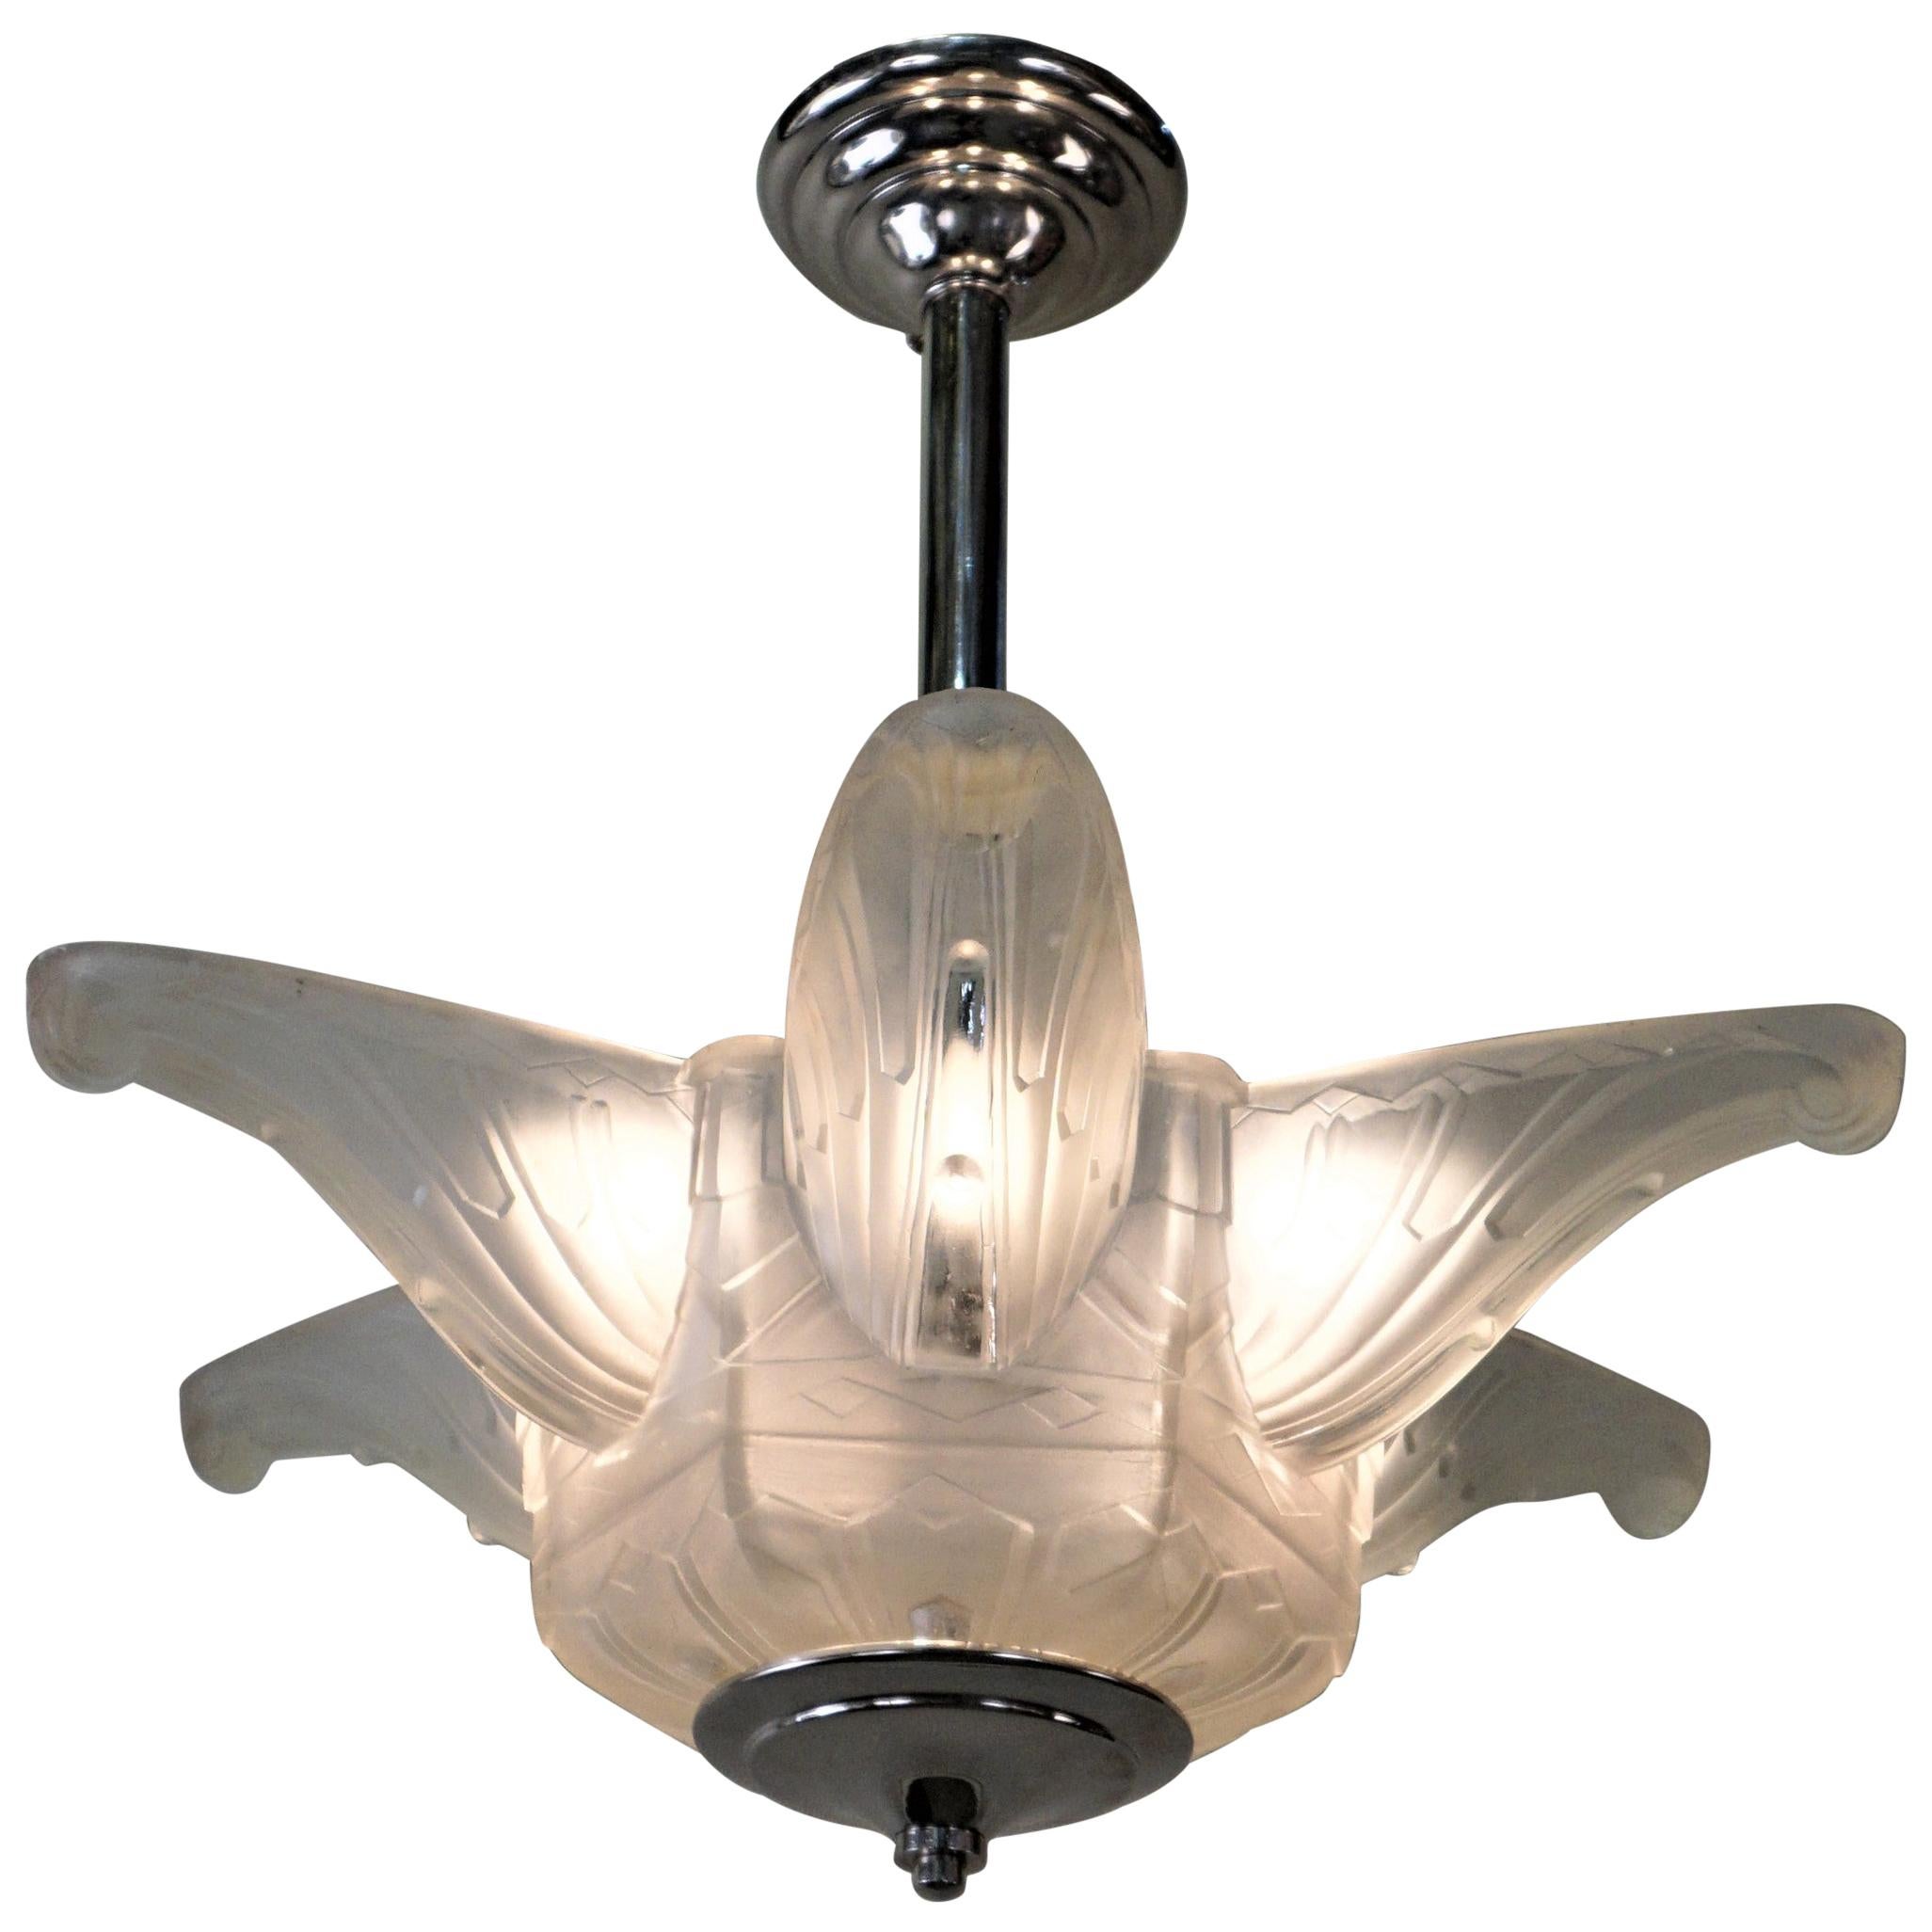 French Art Deco Chandelier by Des Hanots